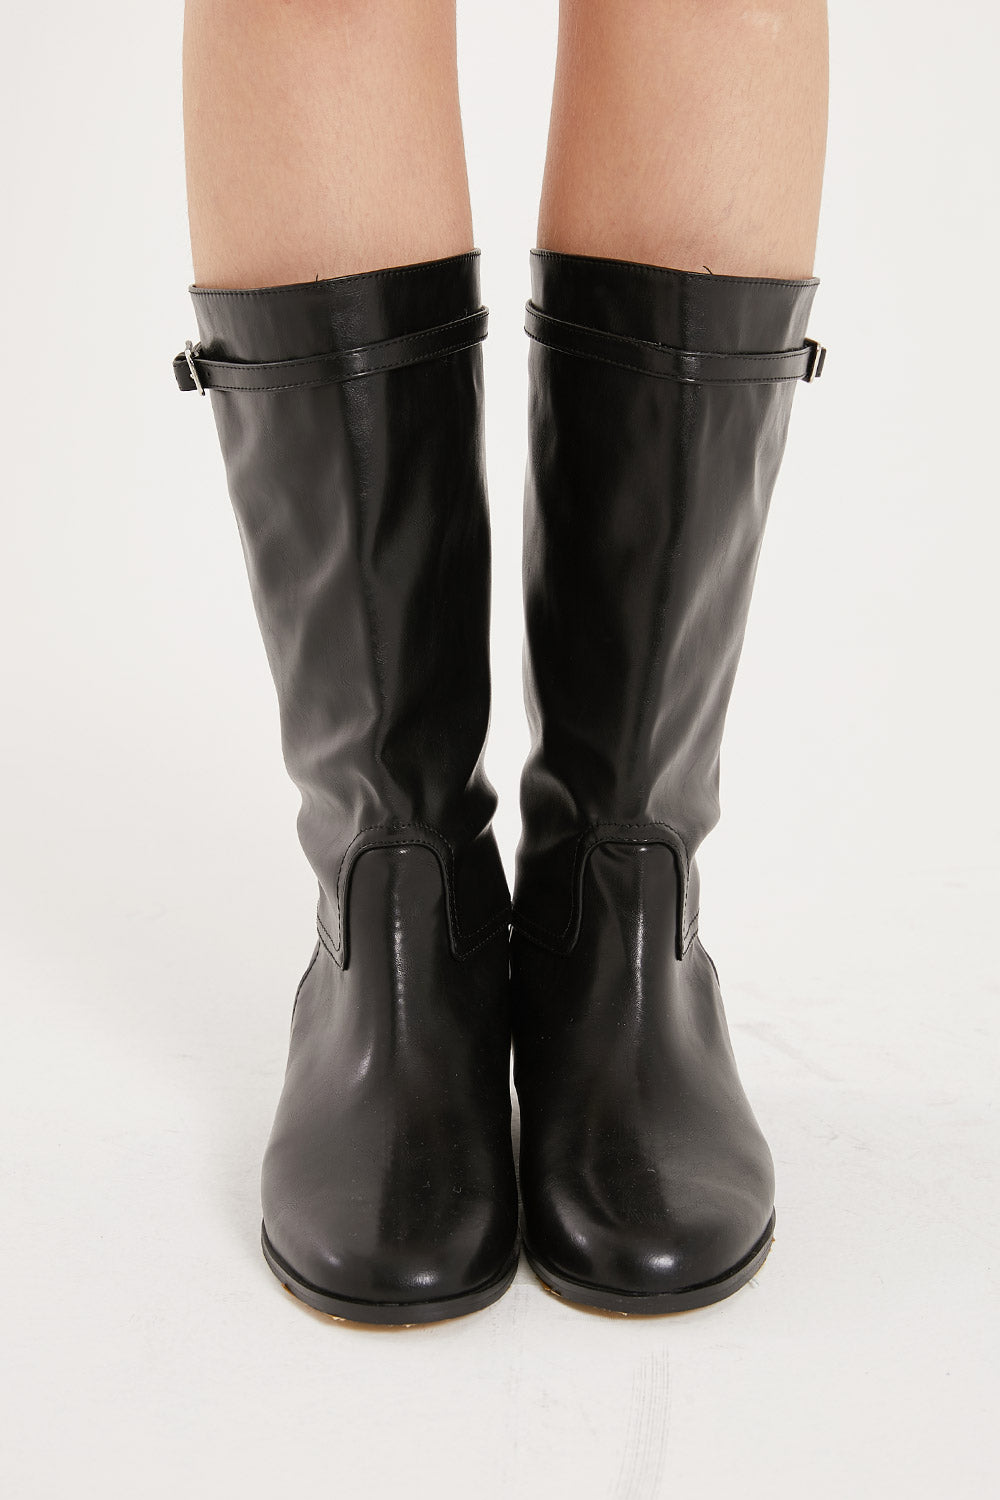 storets.com Sharon Pleather Middle Boots